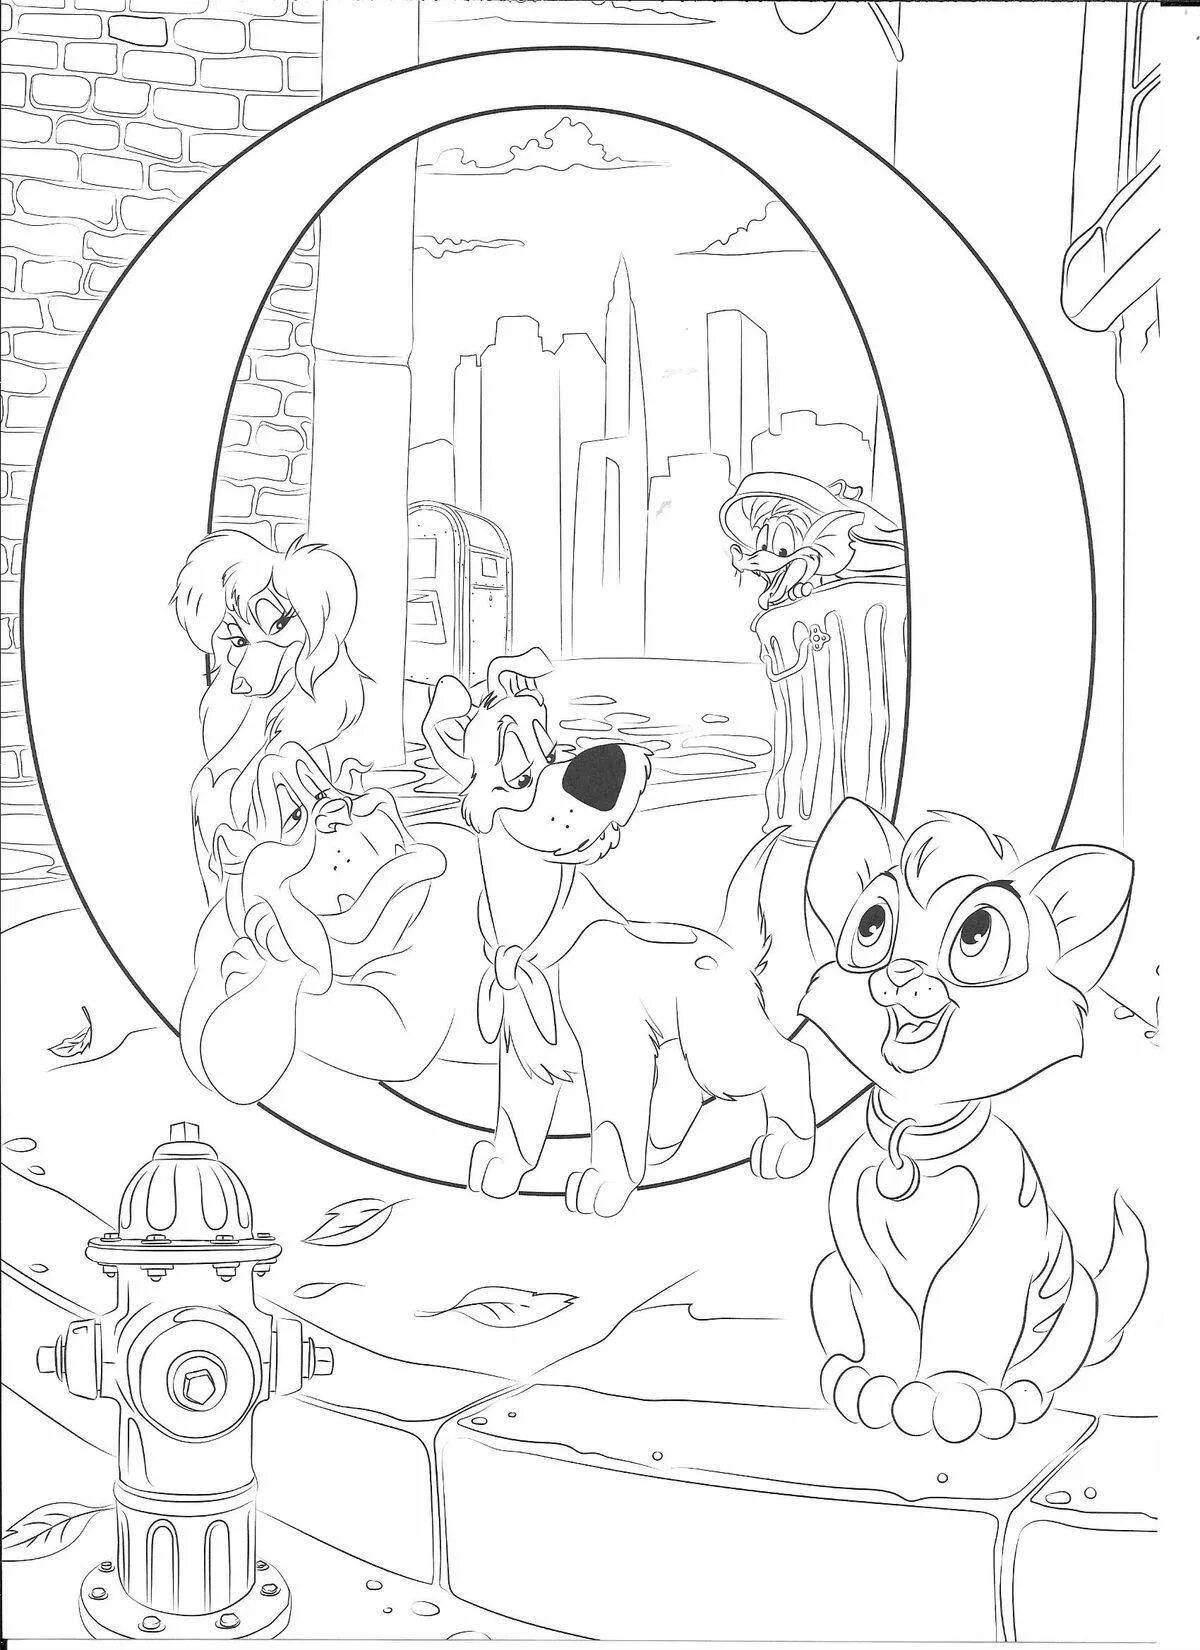 Jolly oliver and company coloring